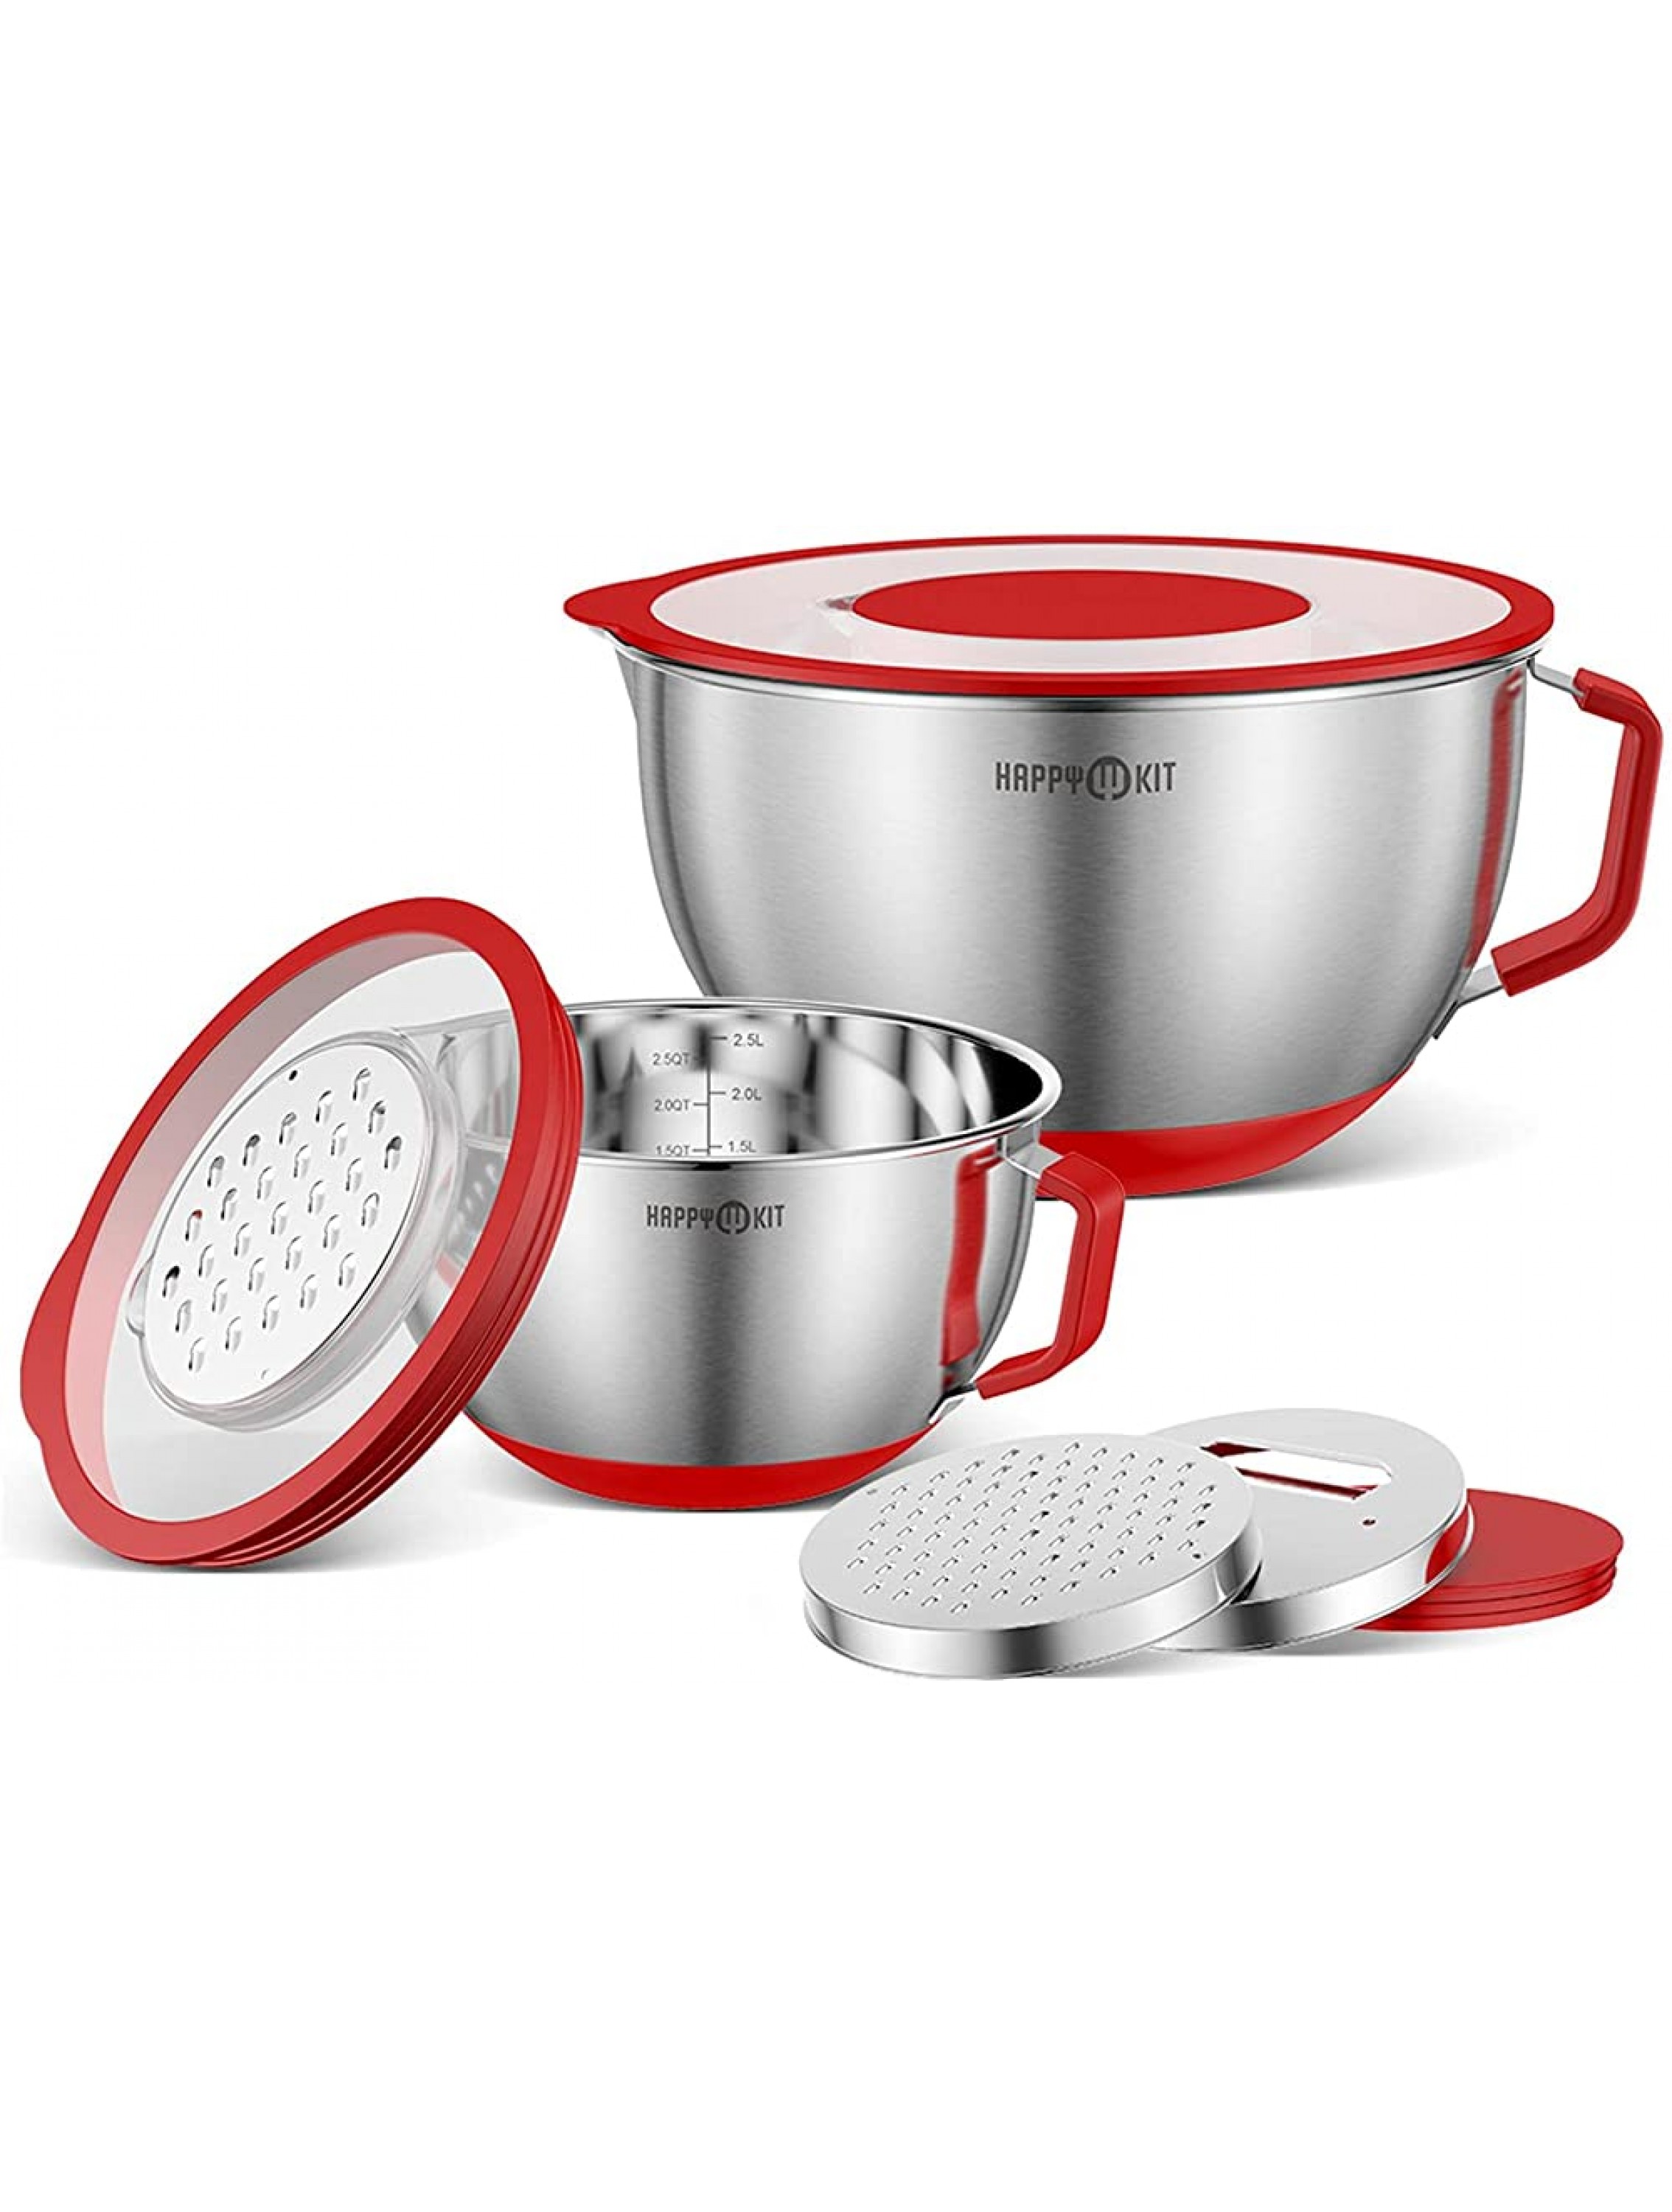 HAPPY KIT Mixing Bowls with Lids Set of 2,Stainless Steel Mixing Bowl with Pour Spout Non-slip Handle and Bottoms 3 Grater Attachments Measurement Marks & Lid Size 5 3QTRed - BI05FVKKT